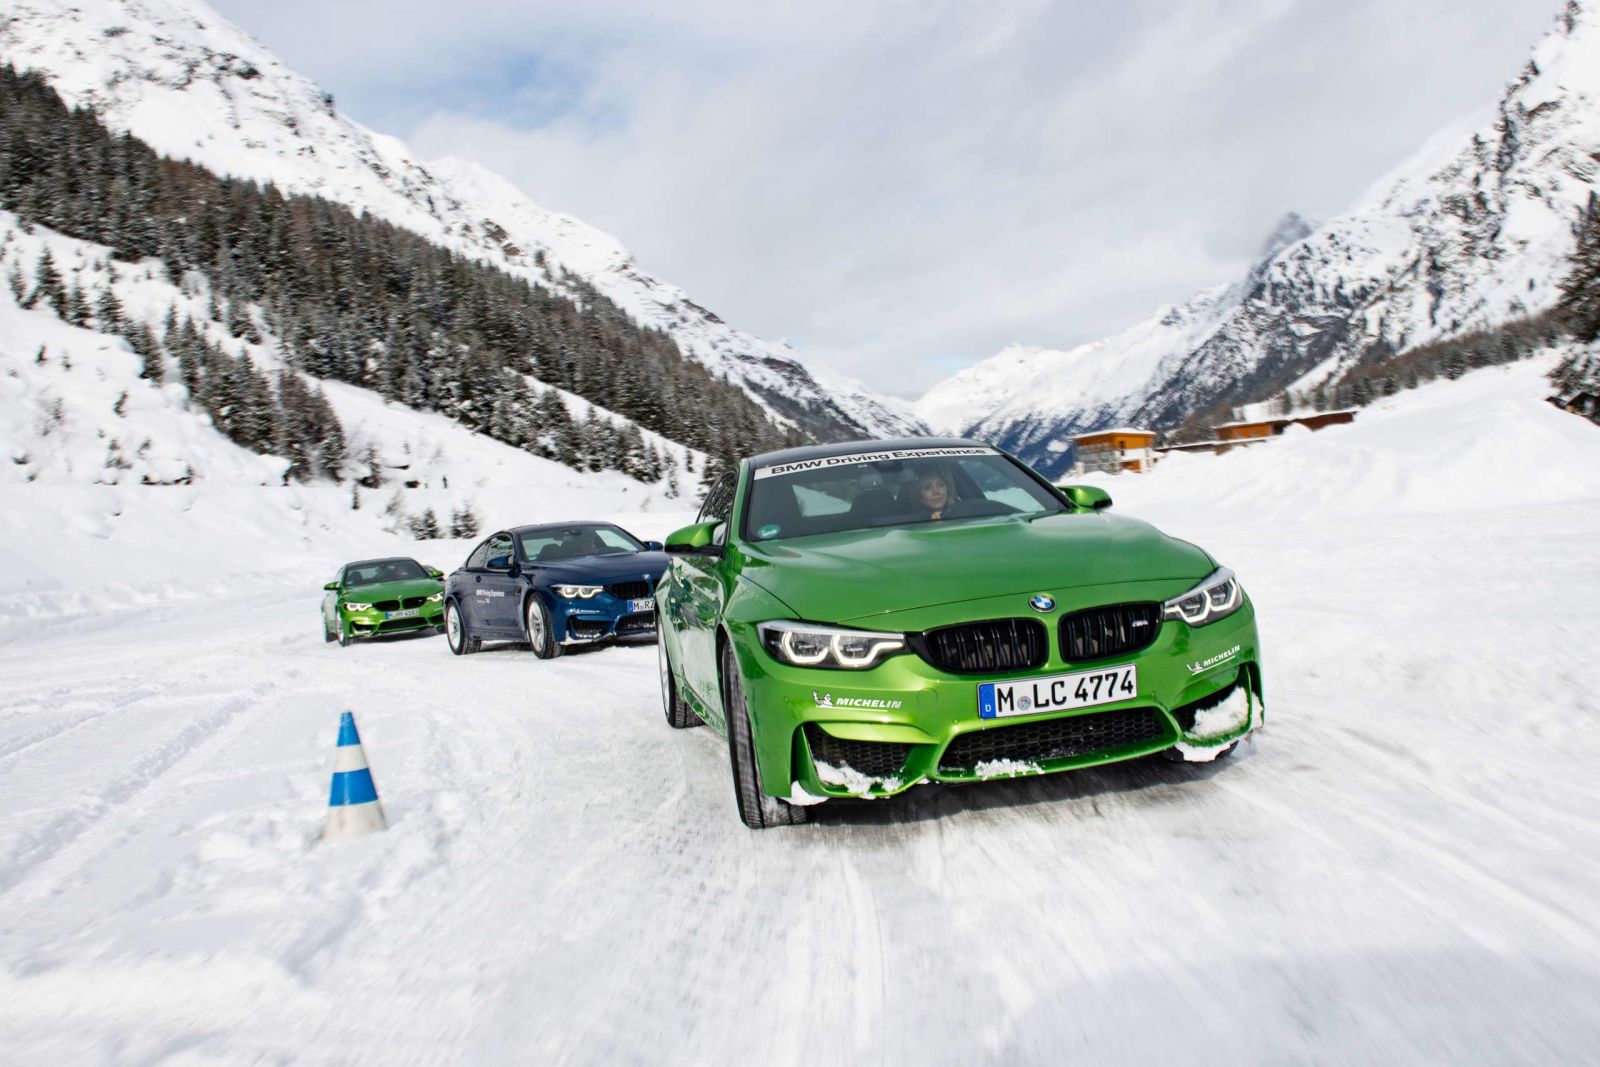 Illustration for article titled Will do a BMW Snow Drift Training Tomorrow